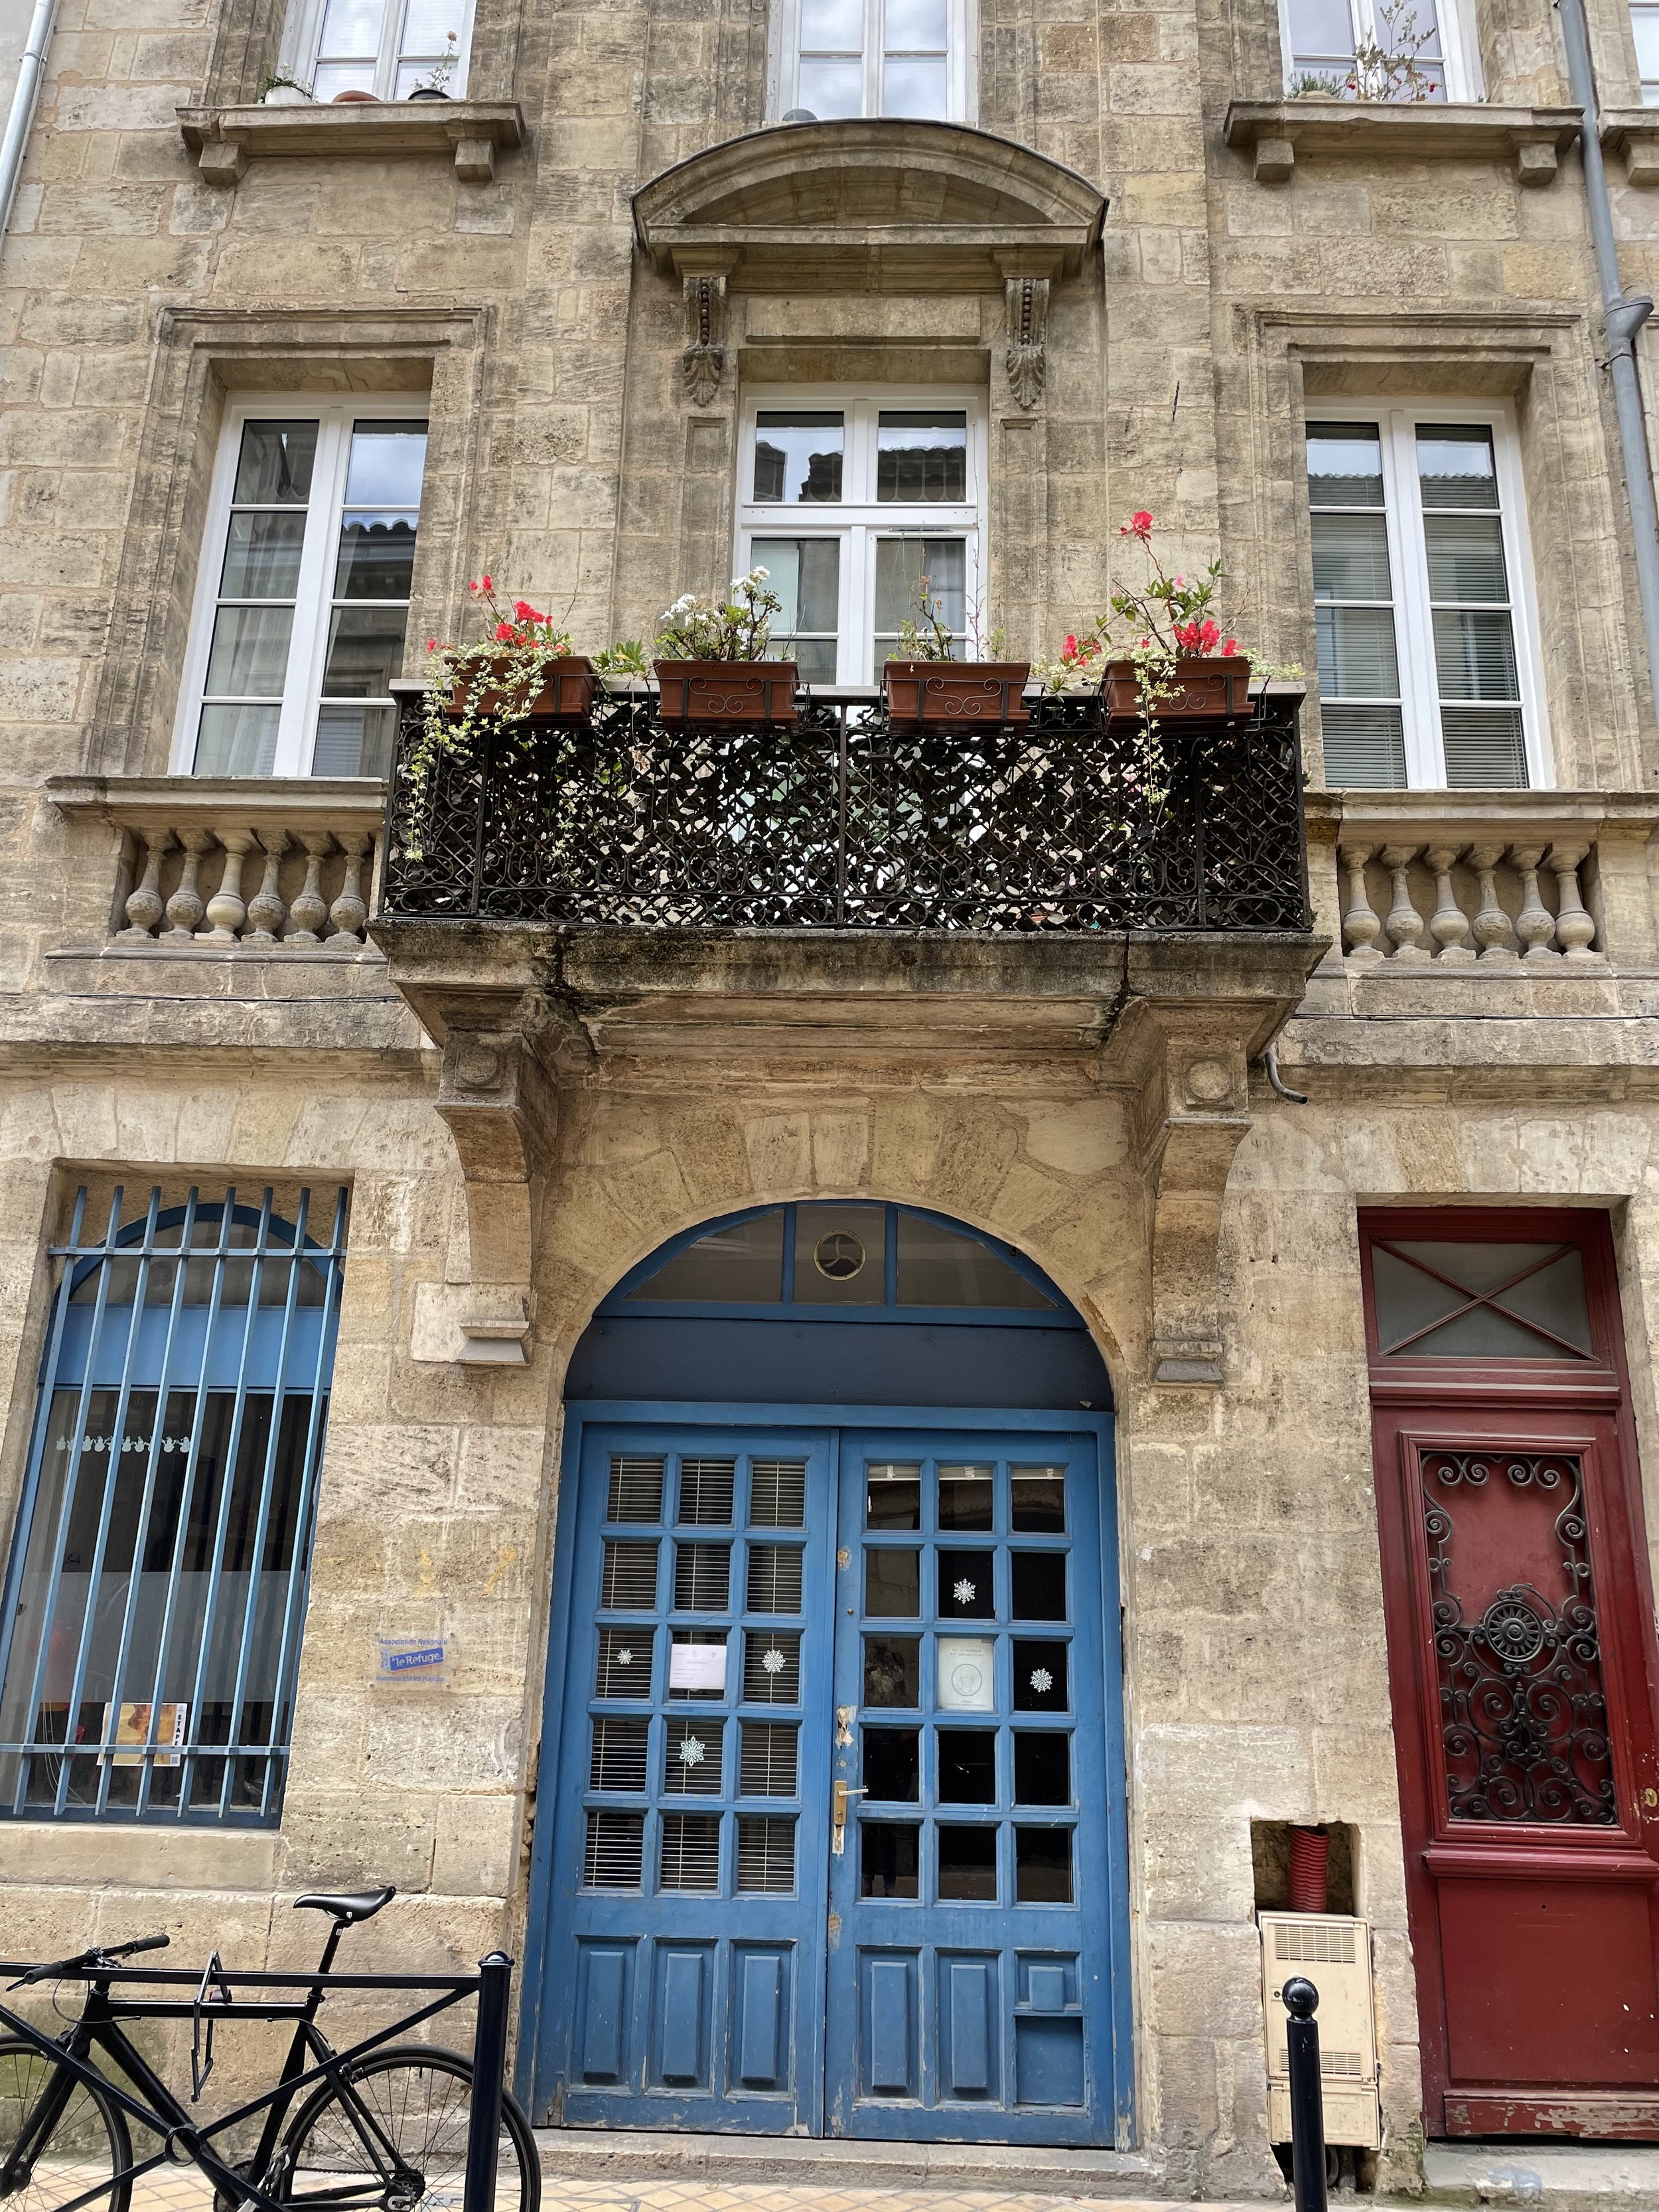 Bordeaux is known for its Blue Doors